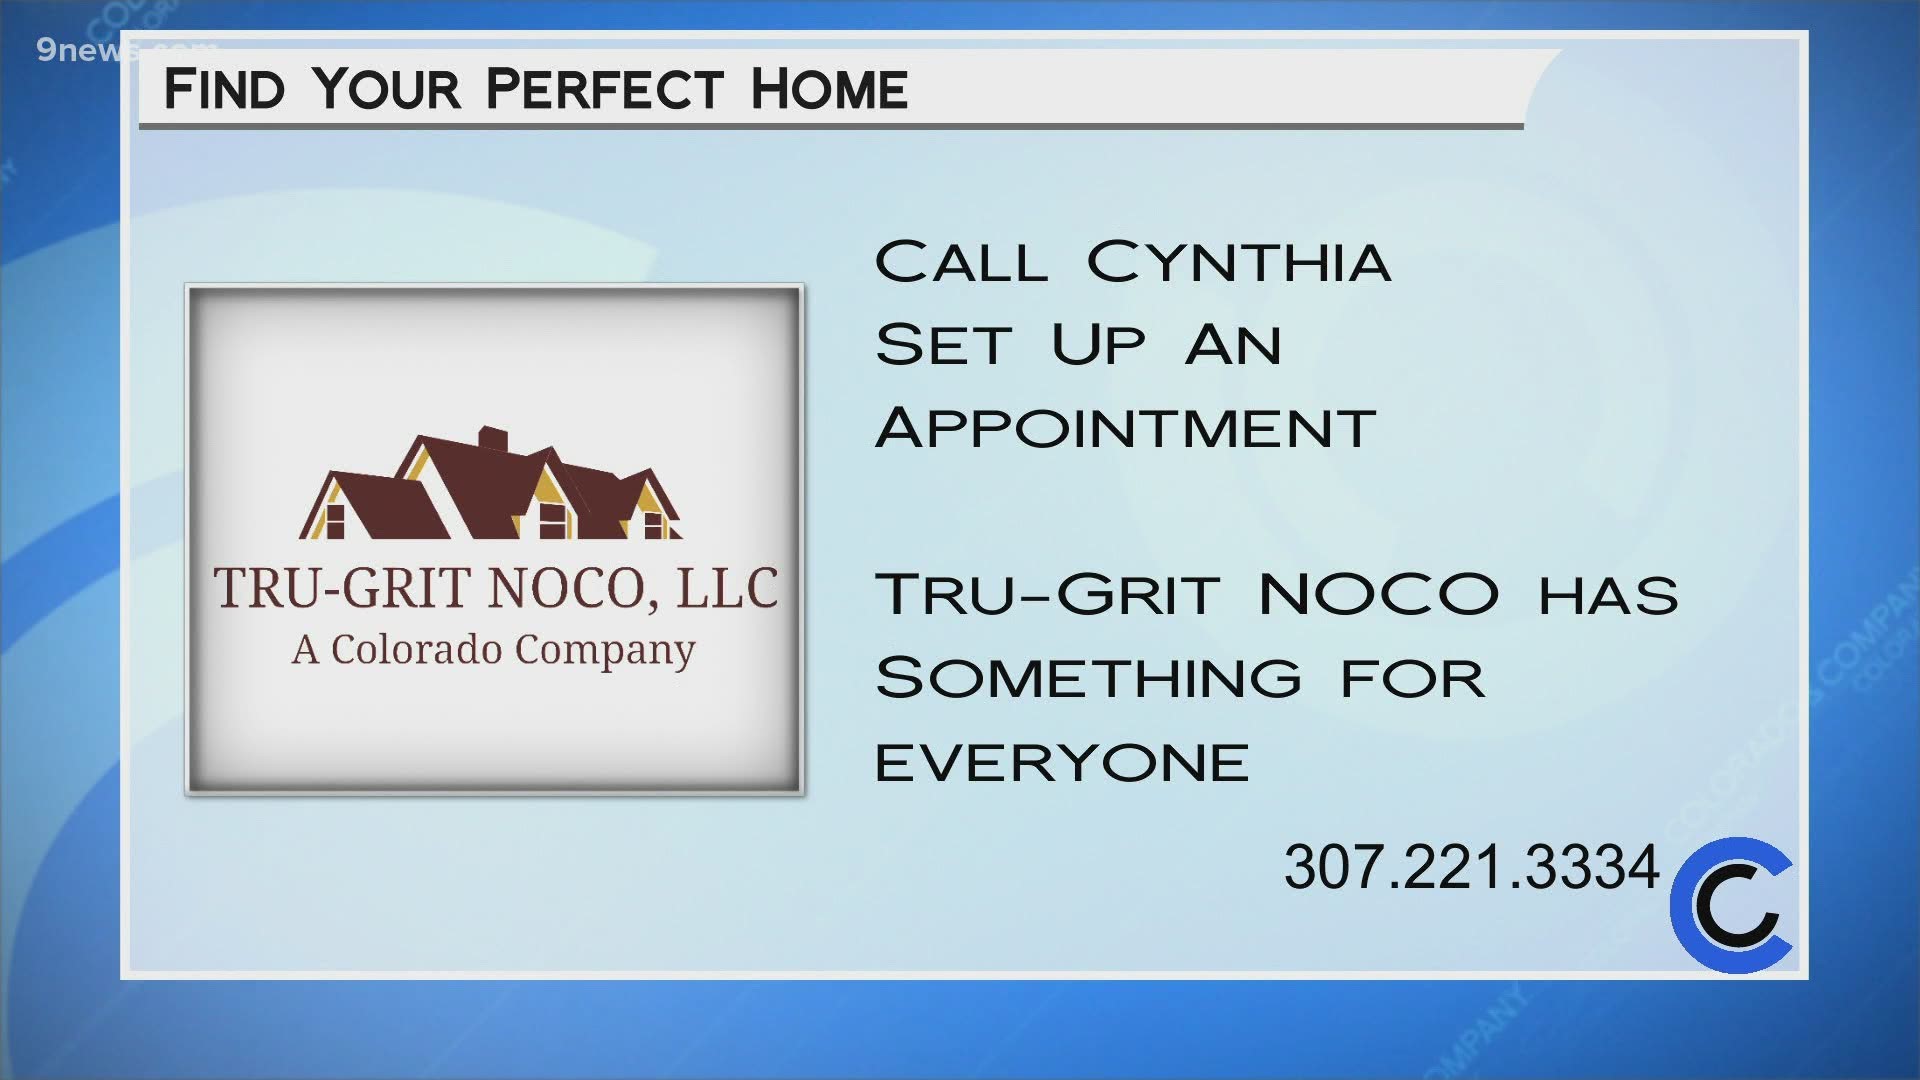 Tru Grit is building top of the line homes in Northern Colorado. Learn more and set up an appointment to visit at MHBWY.com, or call Cynthia at 303.221.3334.